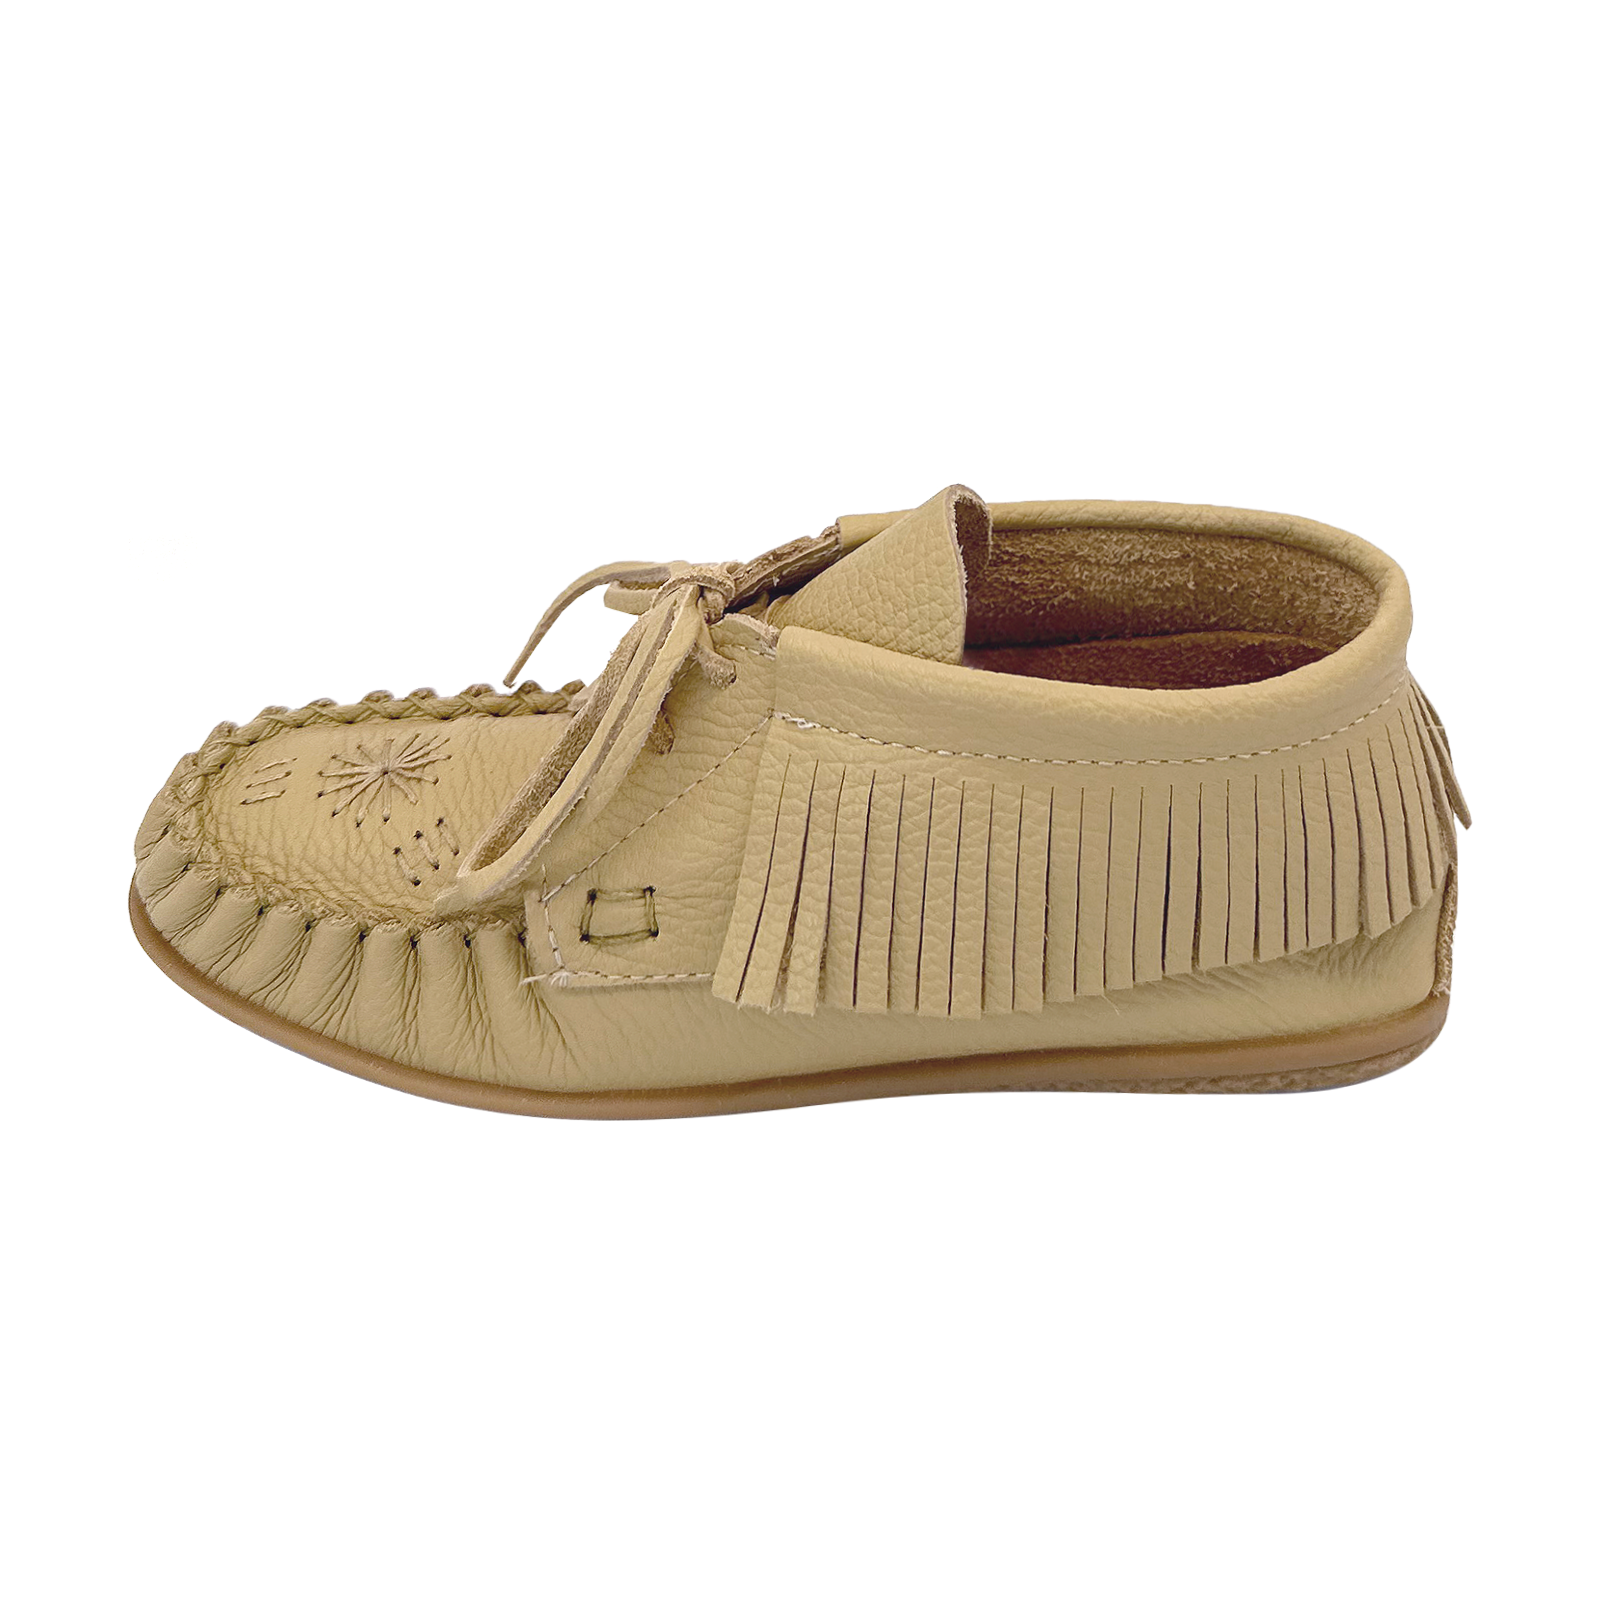 Women's Fringed Ankle Moccasins (Final Clearance)